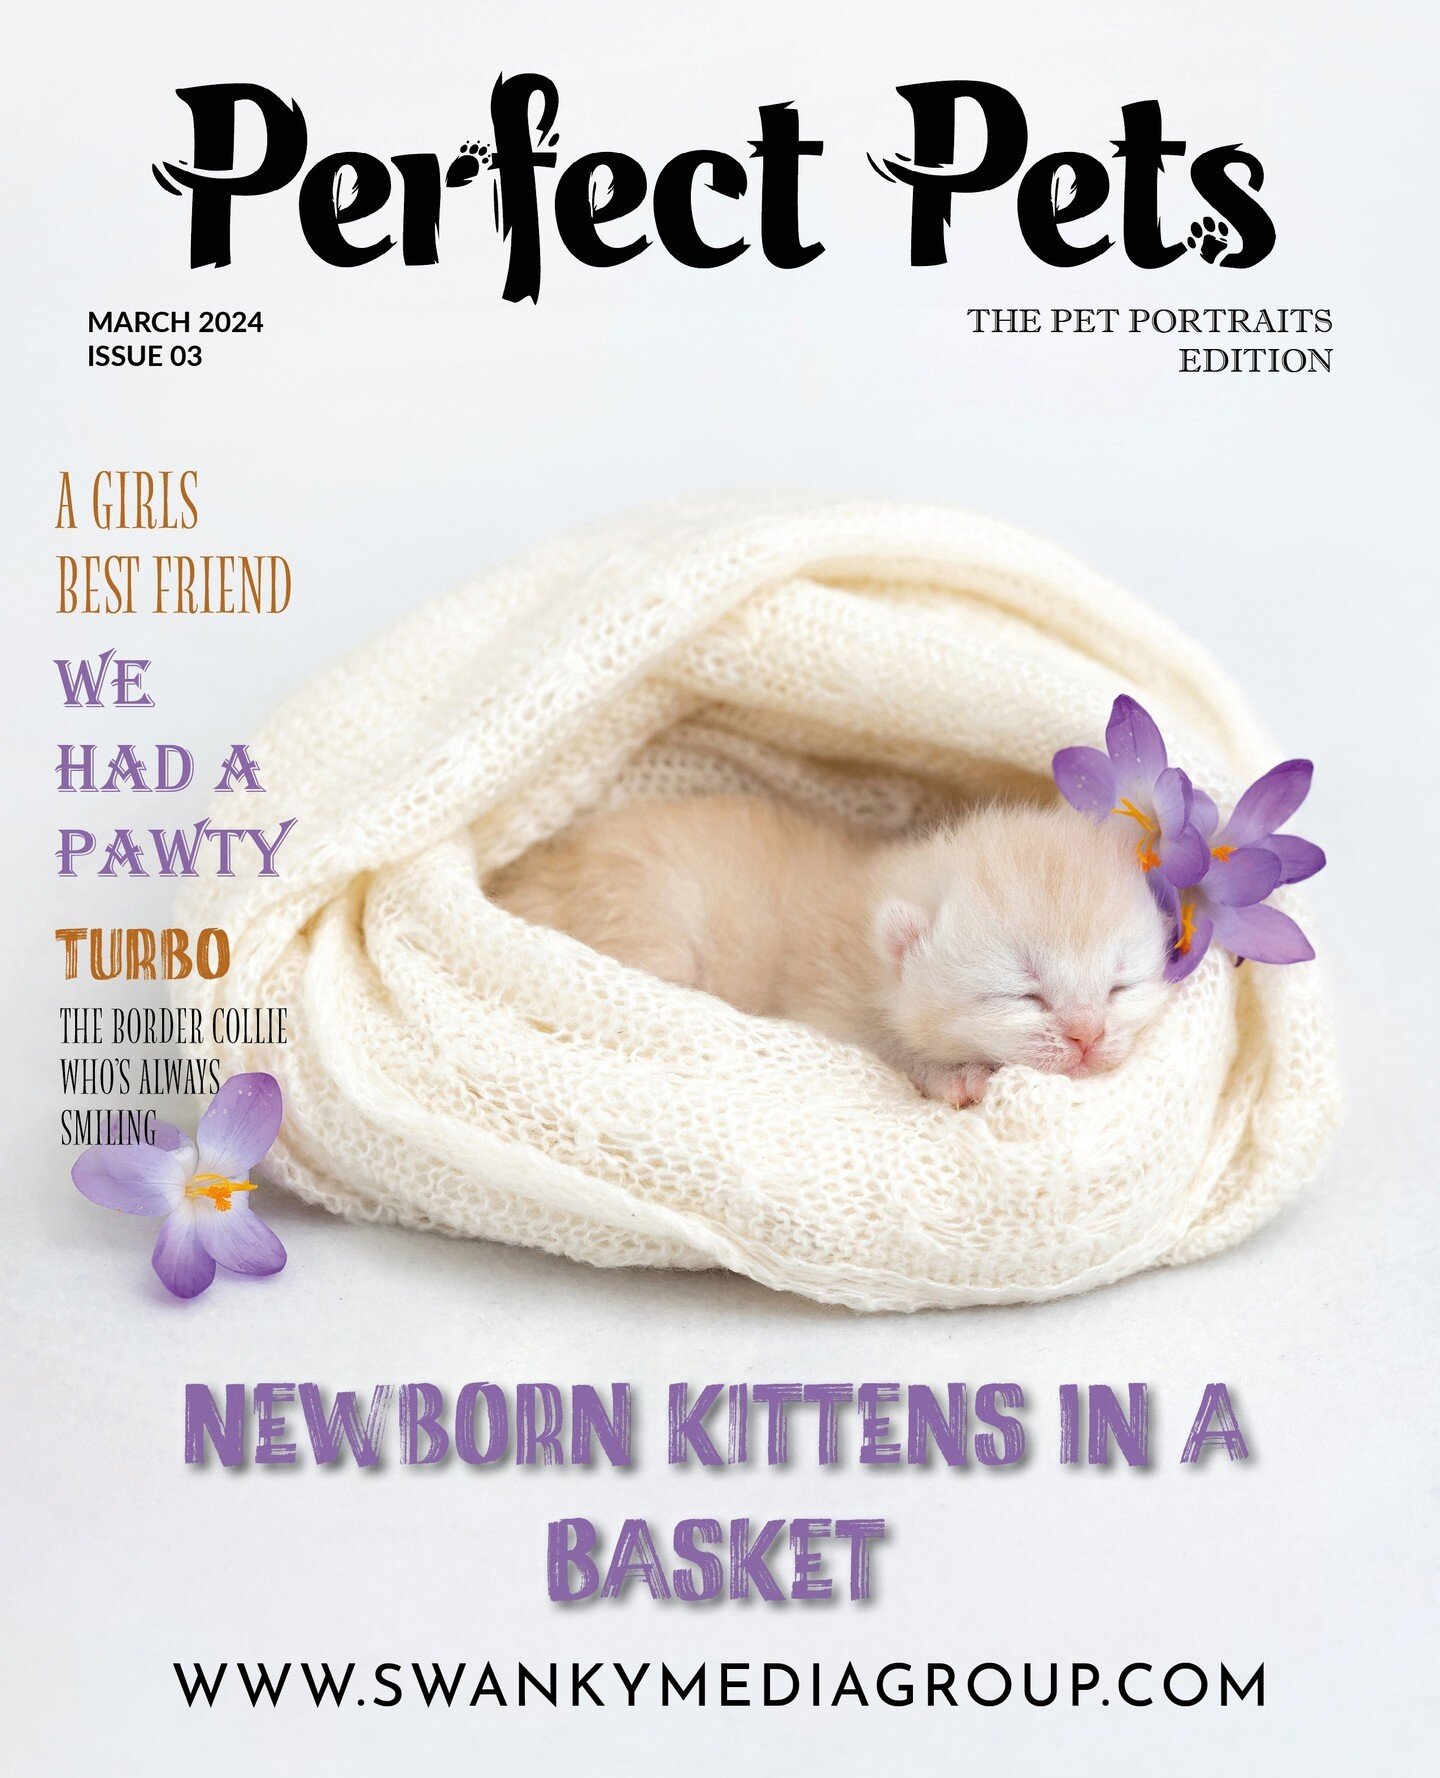 OUR MARCH ISSUES HAVE ARRIVED 🪻💜⁠
⁠
Perfect Pets Magazine - March 2024: The Pet Portrait Edition Issue 3⁠
⁠
Front cover: Newborn kittens in a basket⁠
⁠
Photographer: Galina Samoylovich⁠
IG: @galinasamgalina⁠
Assistant: Jenna Haag⁠
IG: @jenna_haag⁠
